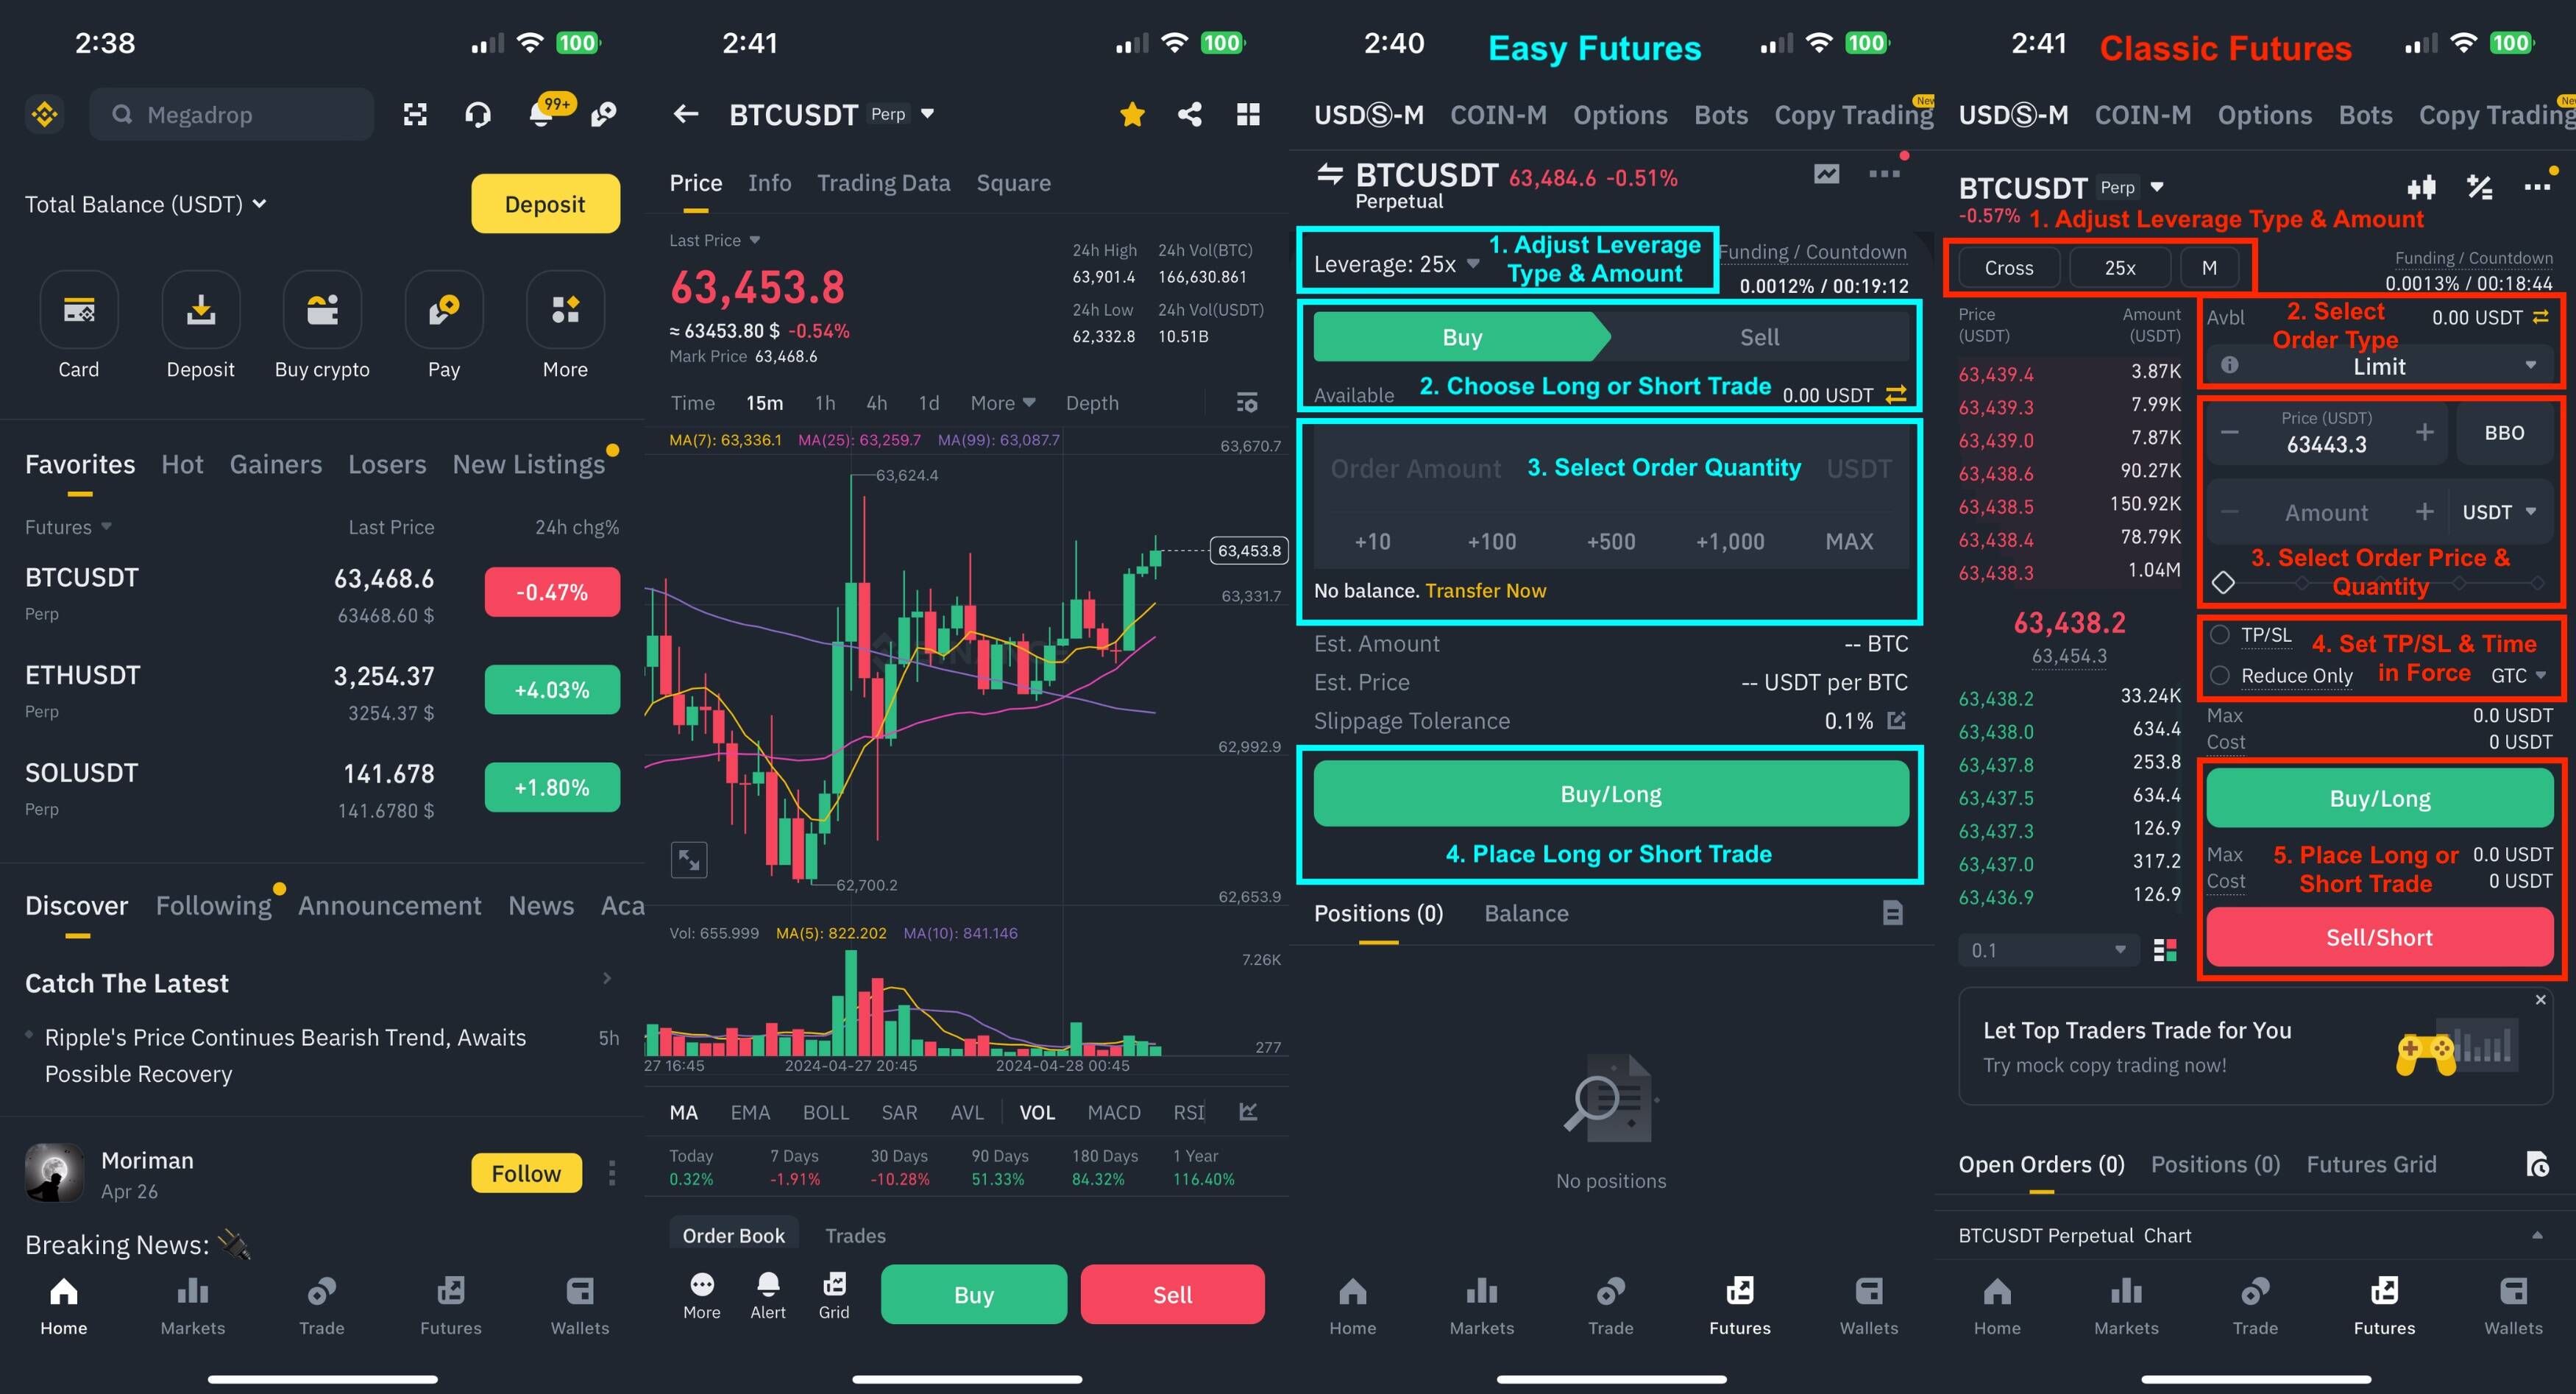 Binance Pro Mobile Interface &amp; Easy/Classic Futures Interfaces